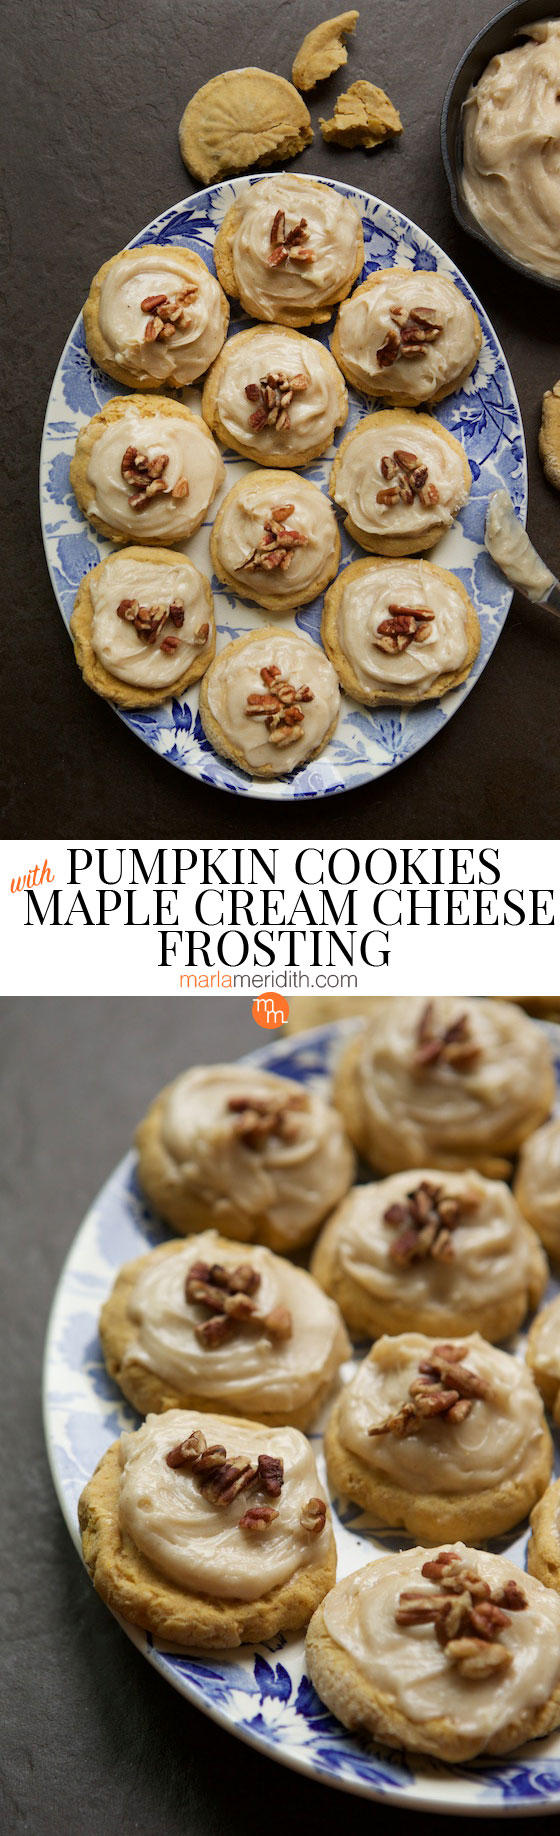 Pumpkin Sugar Cookies with Maple Cream Cheese Frosting #recipe | MarlaMeridith.com #baking #cookies